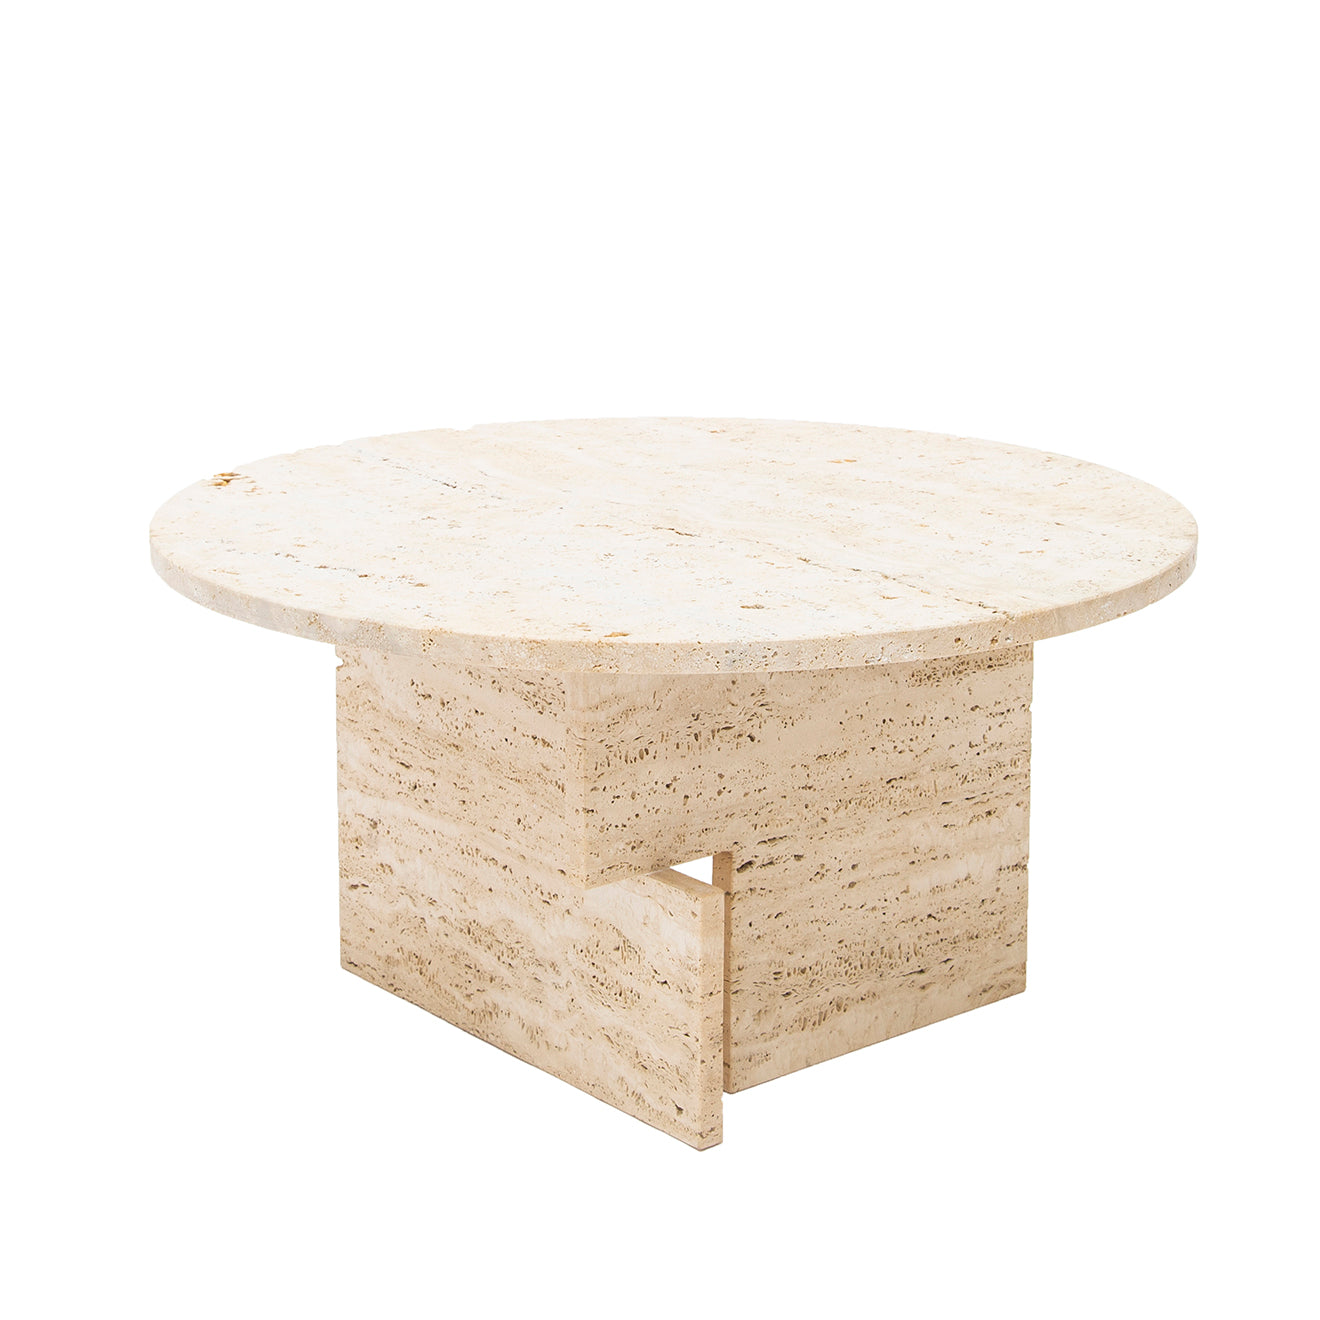 Table basse 068